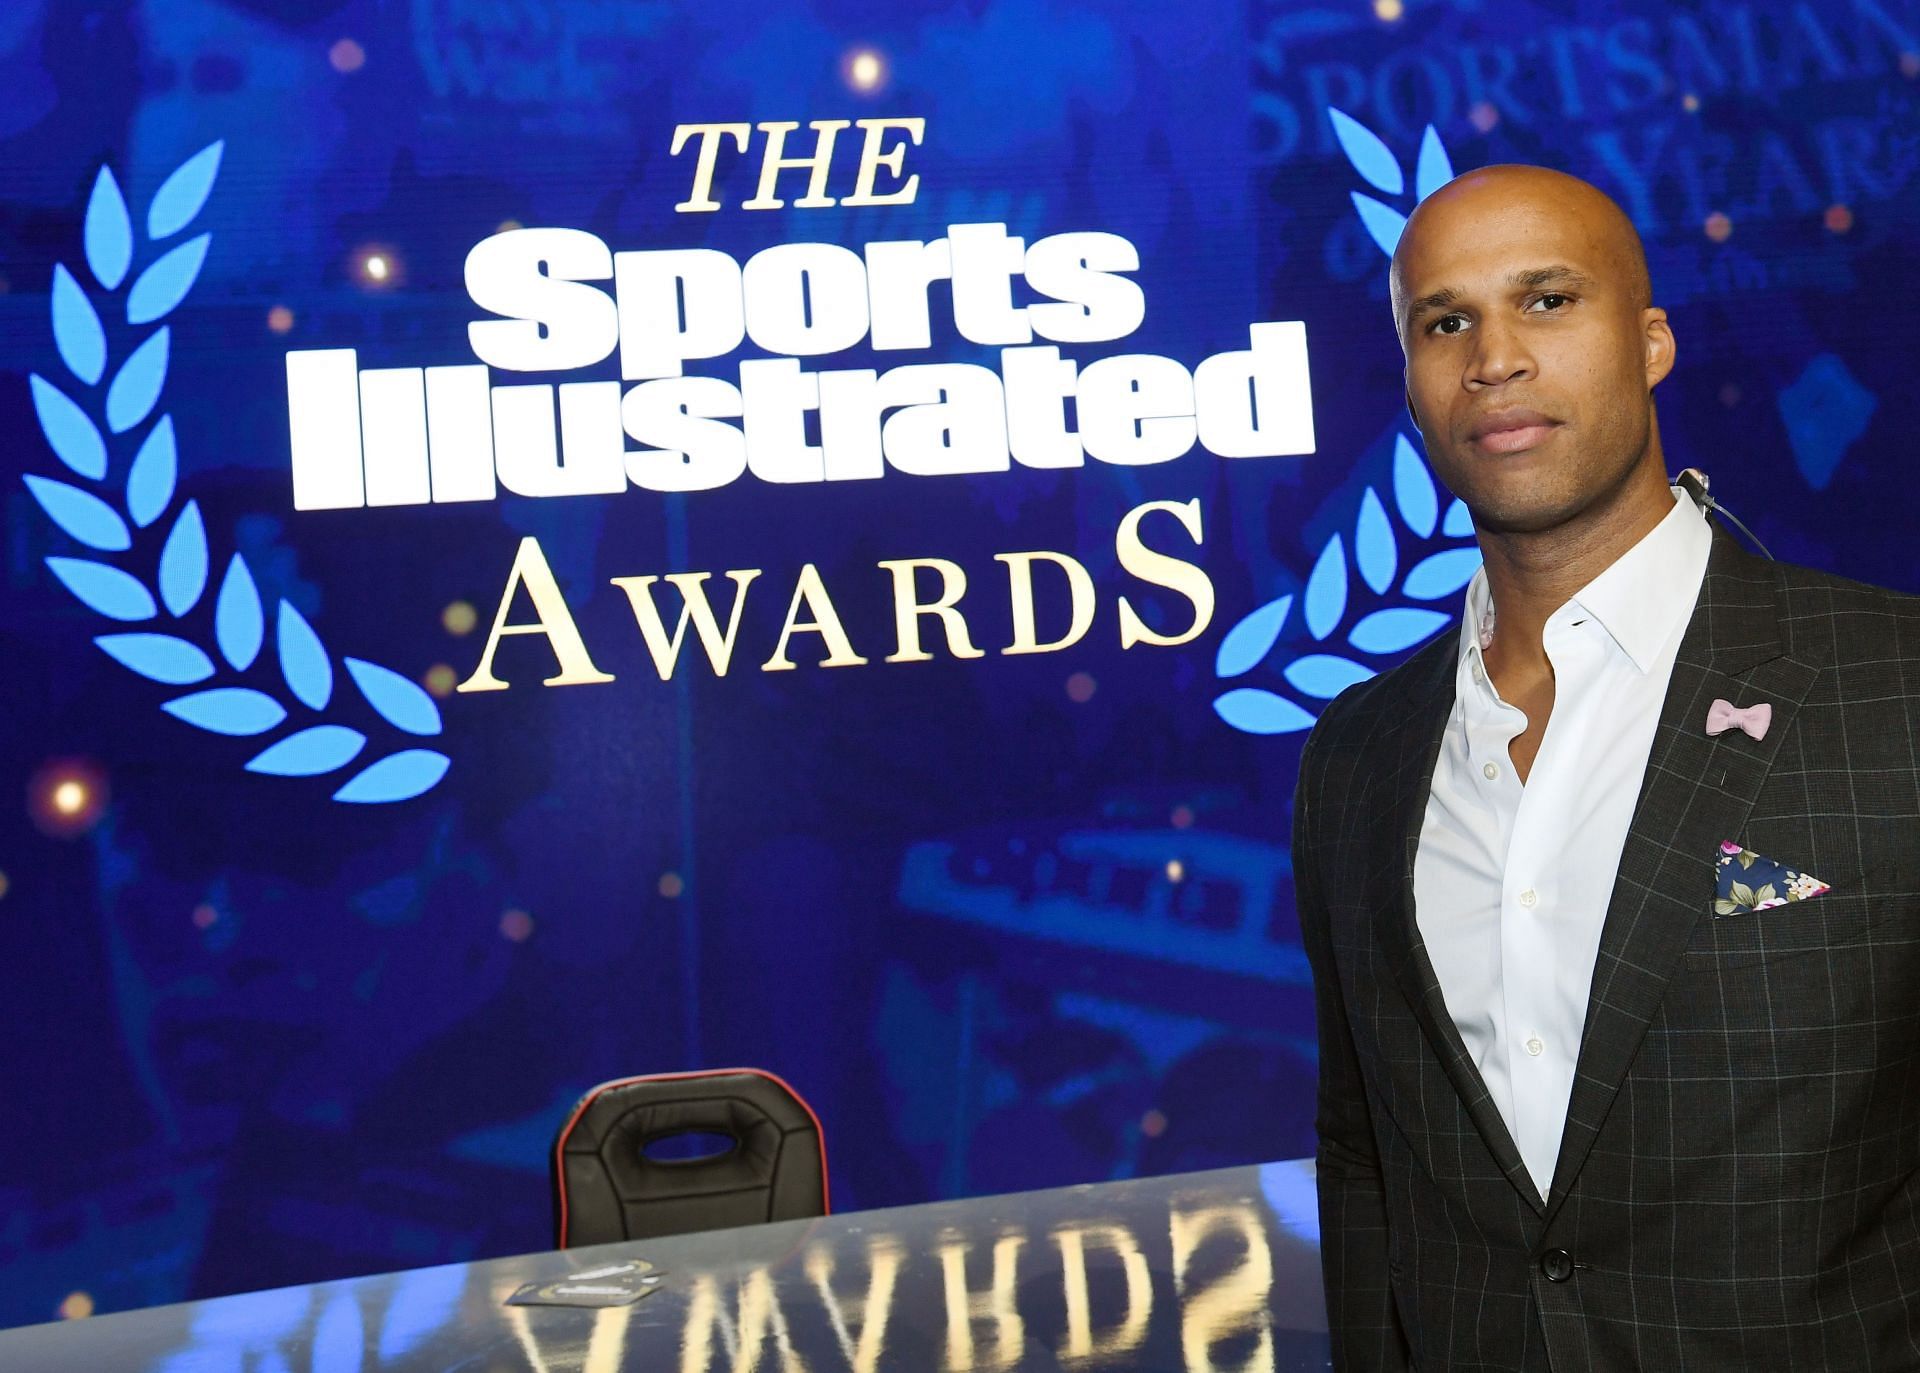 Richard Jefferson is not with the idea of the NBA to shorten the season